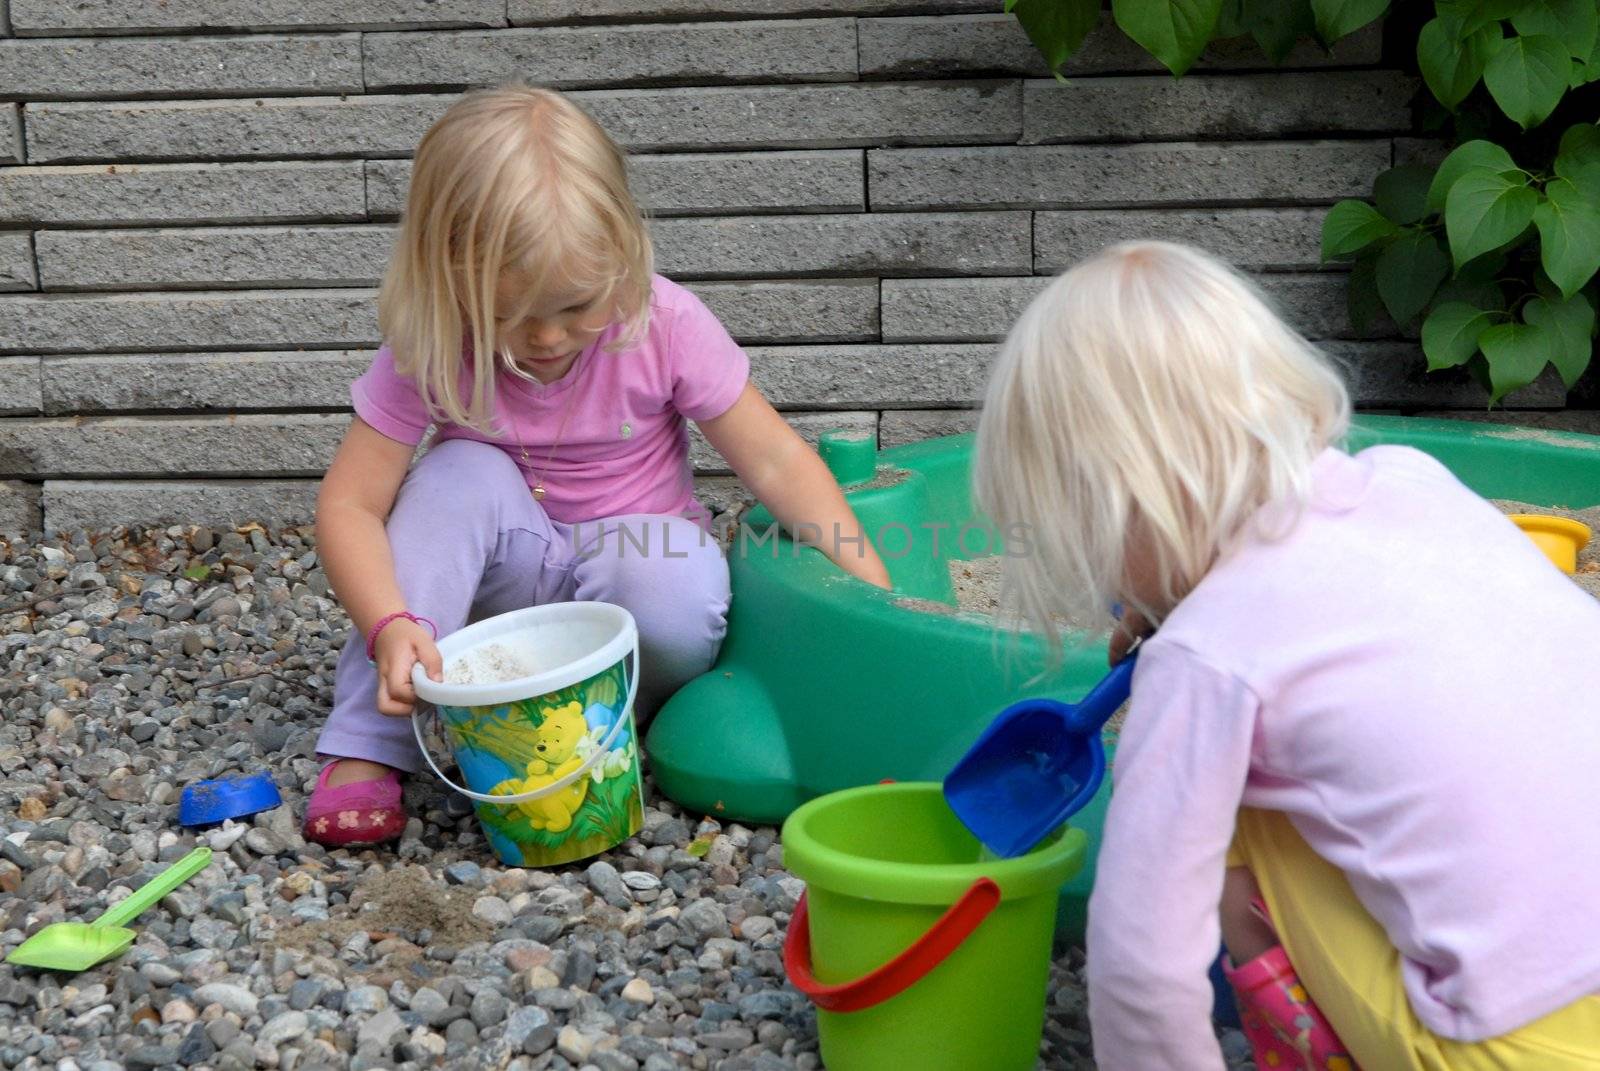 girls playing sand and stones. Please note: No negative use allowed.